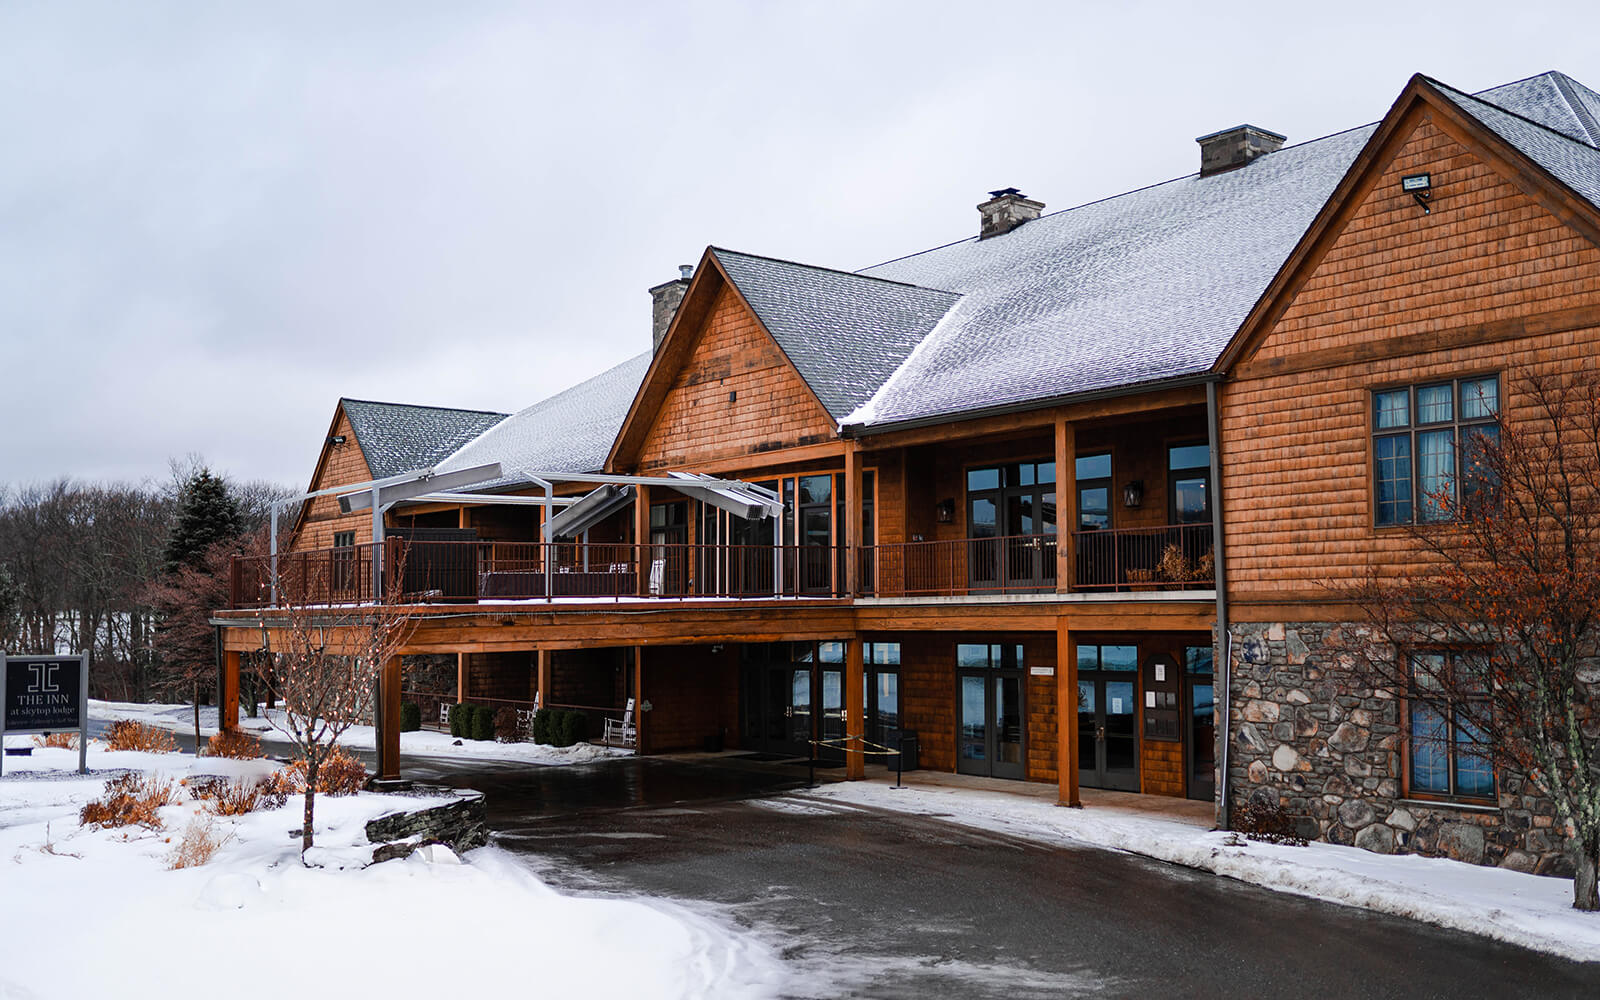 Exterior of Skytop Lodge in the snow